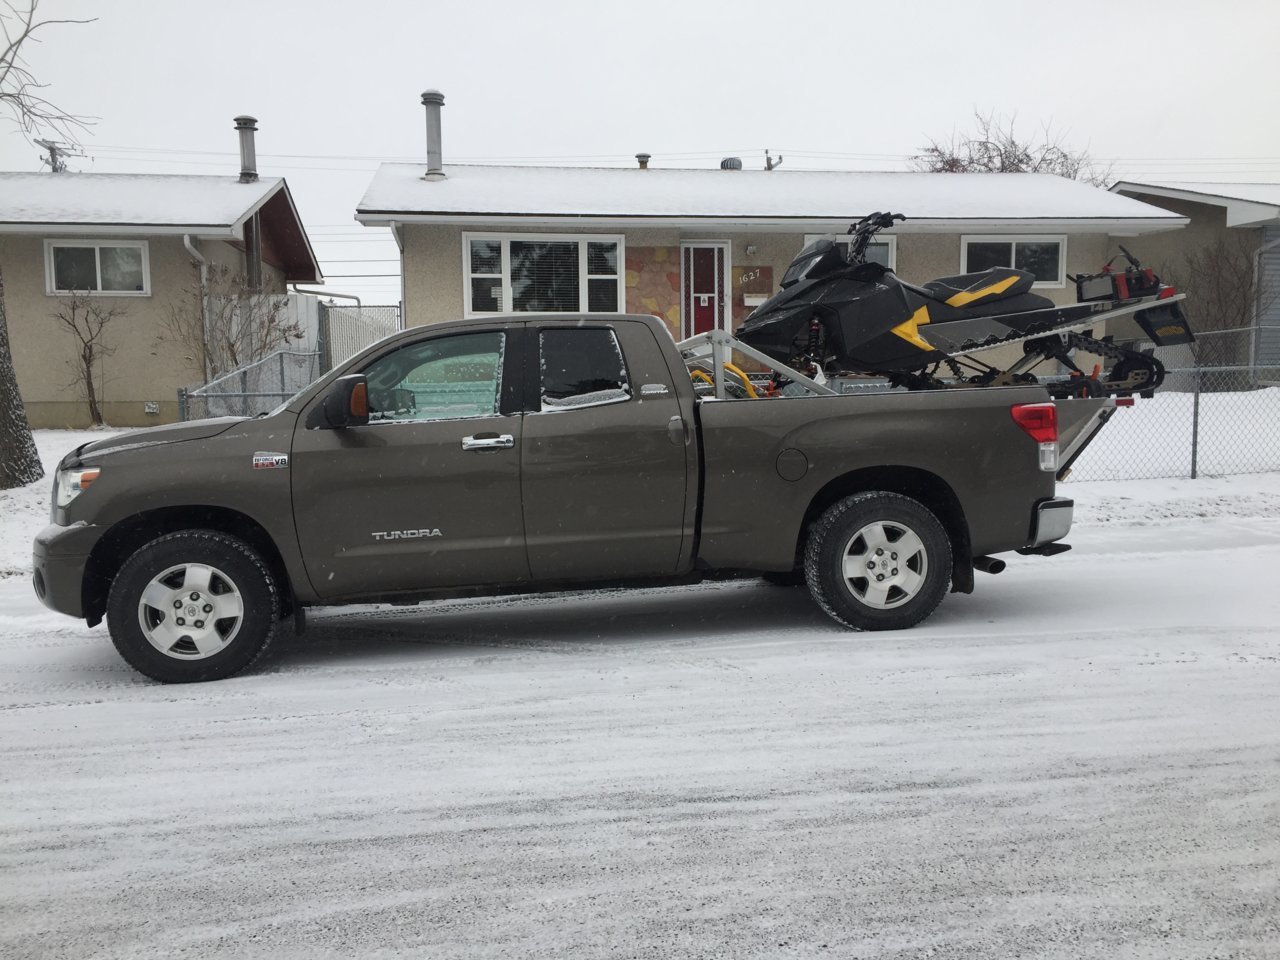 Double Cab Vs Crew Max and why. | Page 4 | Toyota Tundra Forum